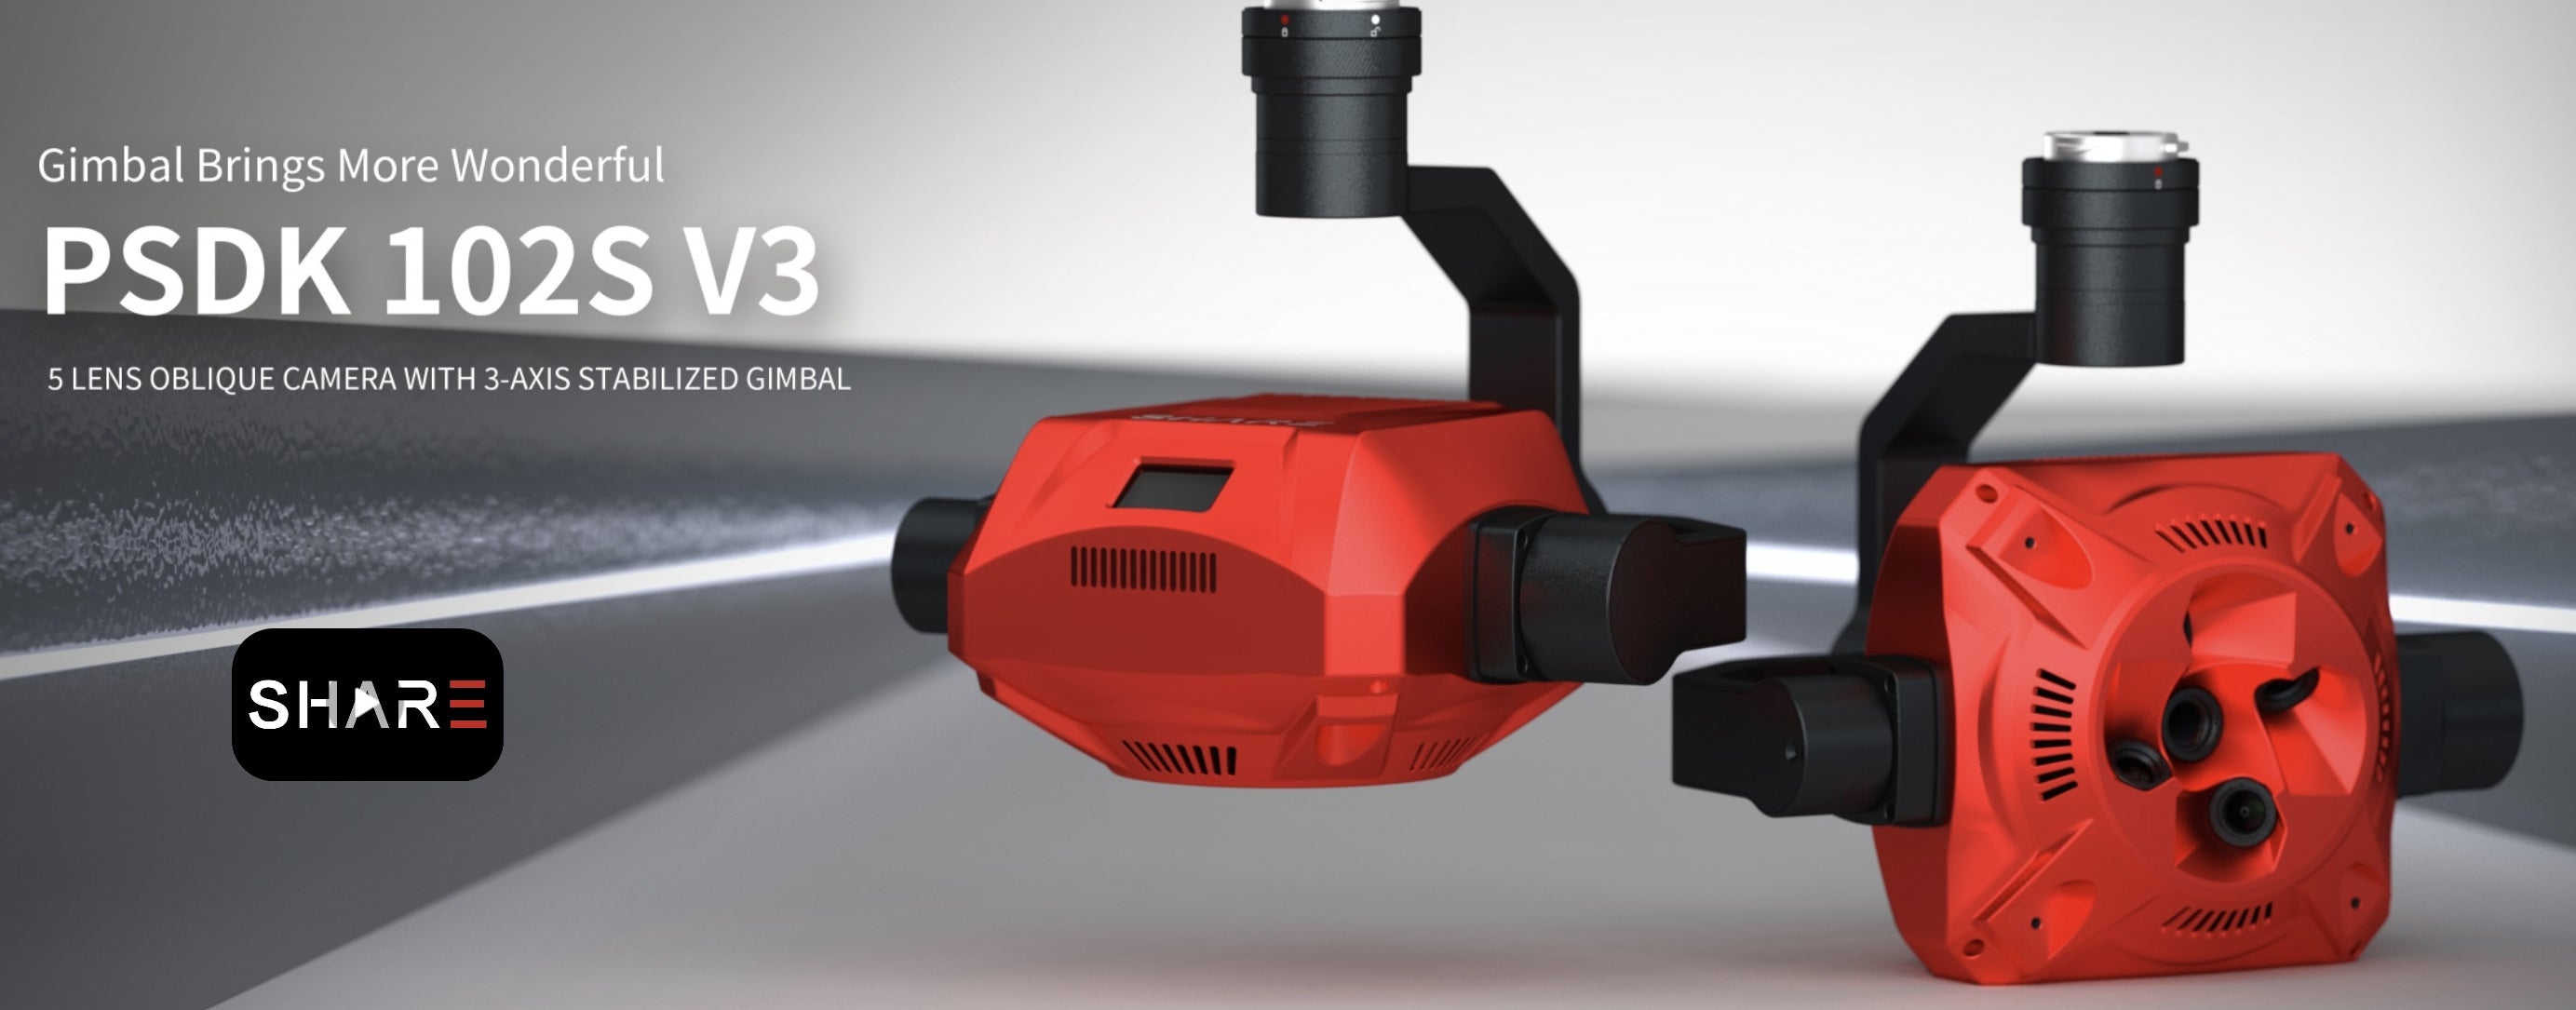 SHARE PSDK 102S V3, UAV drone camera with 125MP sensor, 3-axis stabilization, and oblique angle for 3D surveying and mapping.